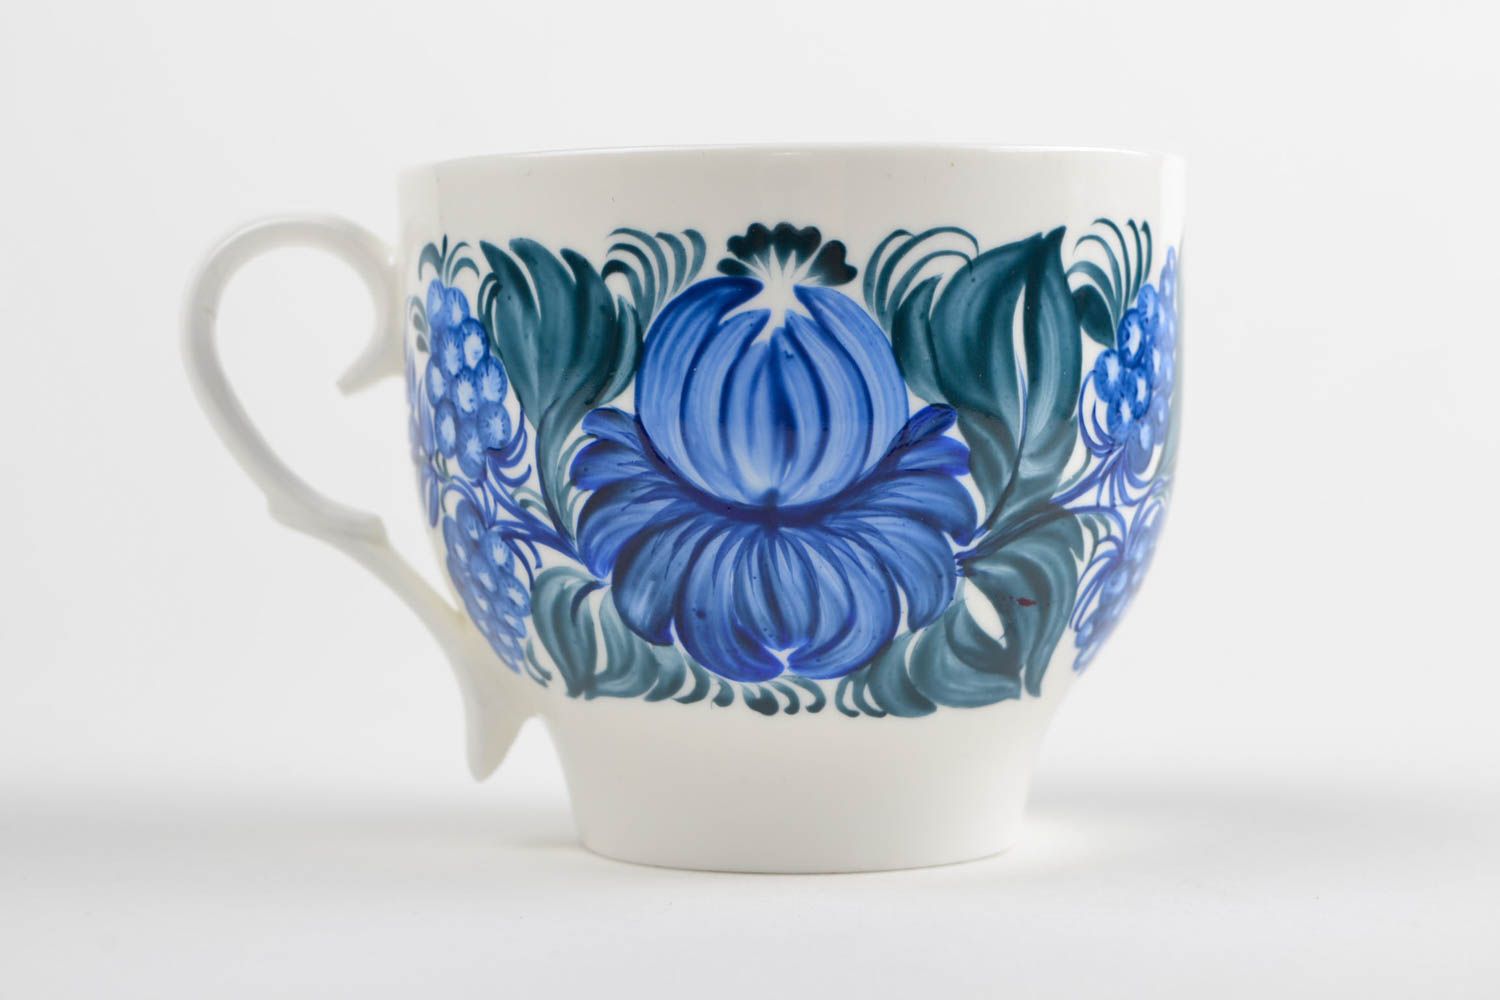 6 oz ceramic porcelain white and blue cup with handle and flower pattern photo 3